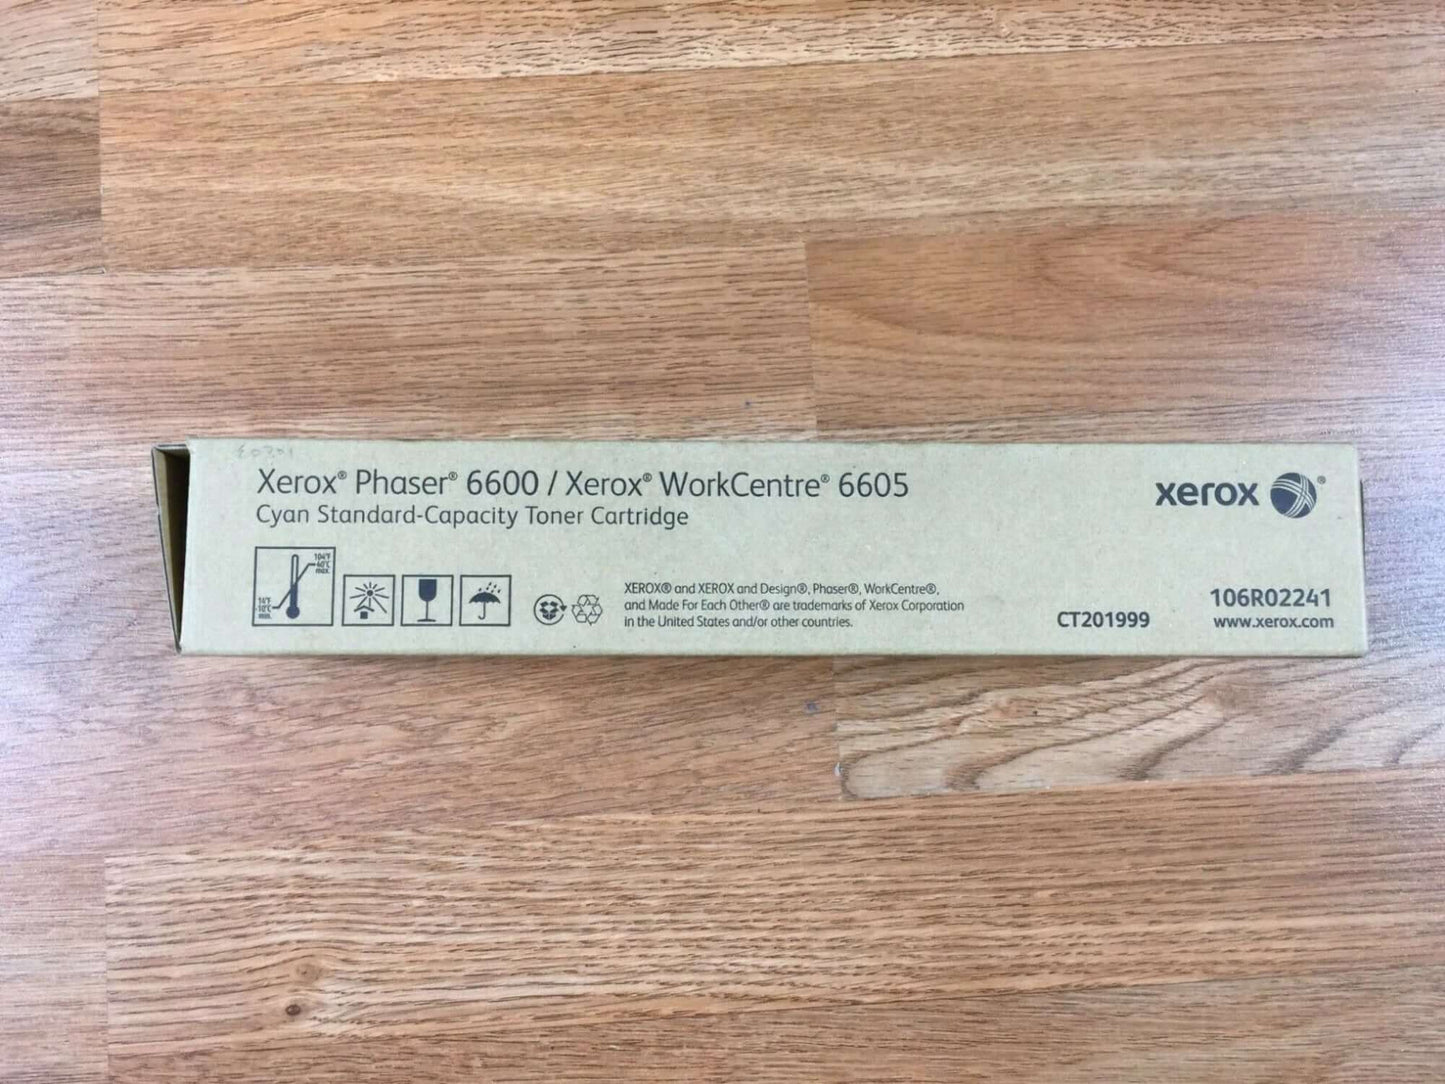 OPEN BOX Xerox Phaser 6600 WorkCentre 6605 Cyan Toner 106R02241- FedEx 2Day Air! - copier-clearance-center